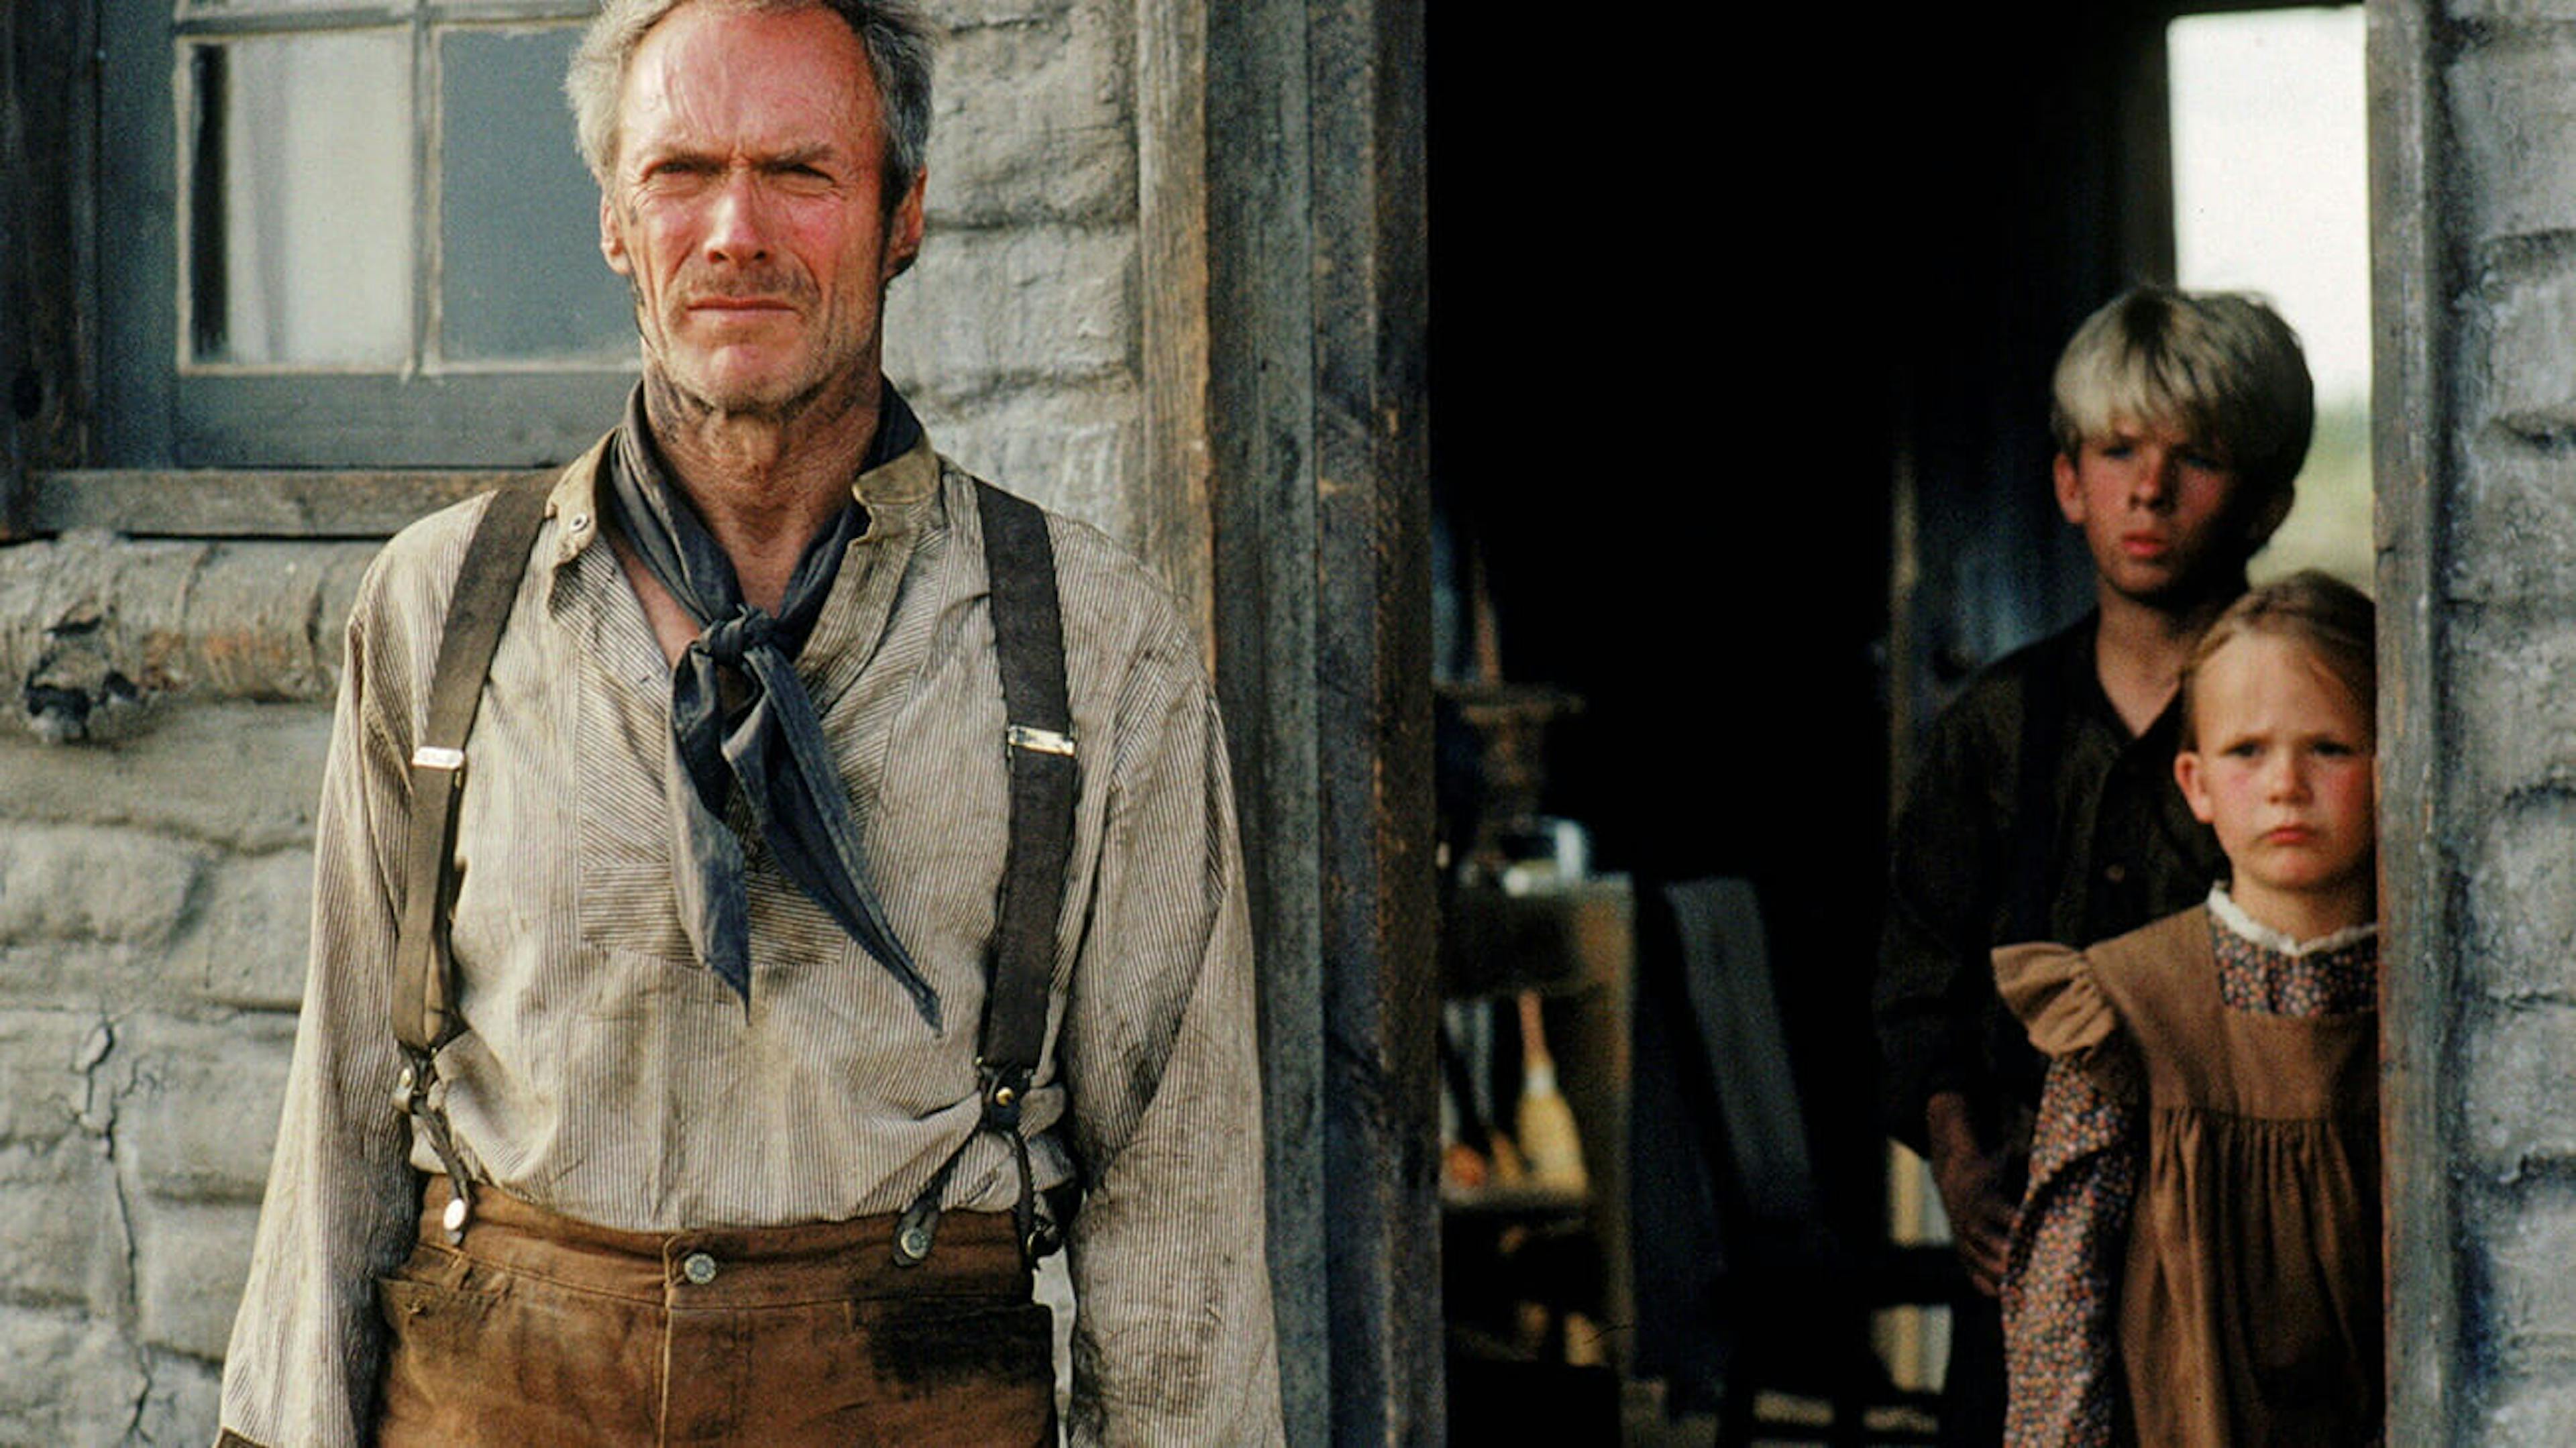 Still from the movie Unforgiven